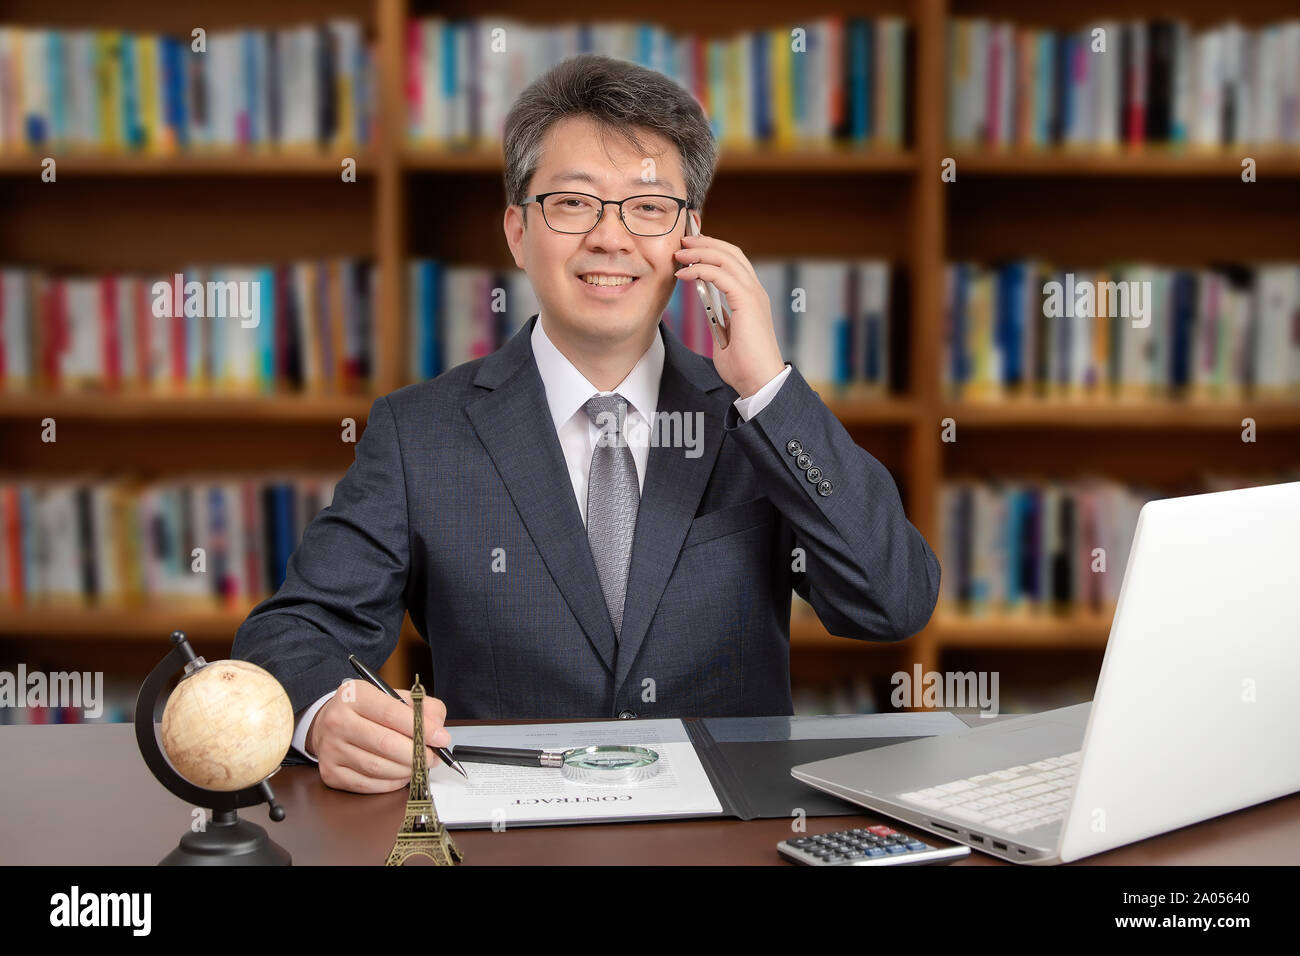 A portrait of an Asian middle-aged male businessman sitting at a desk, smiling and talking on the phone. Stock Photo